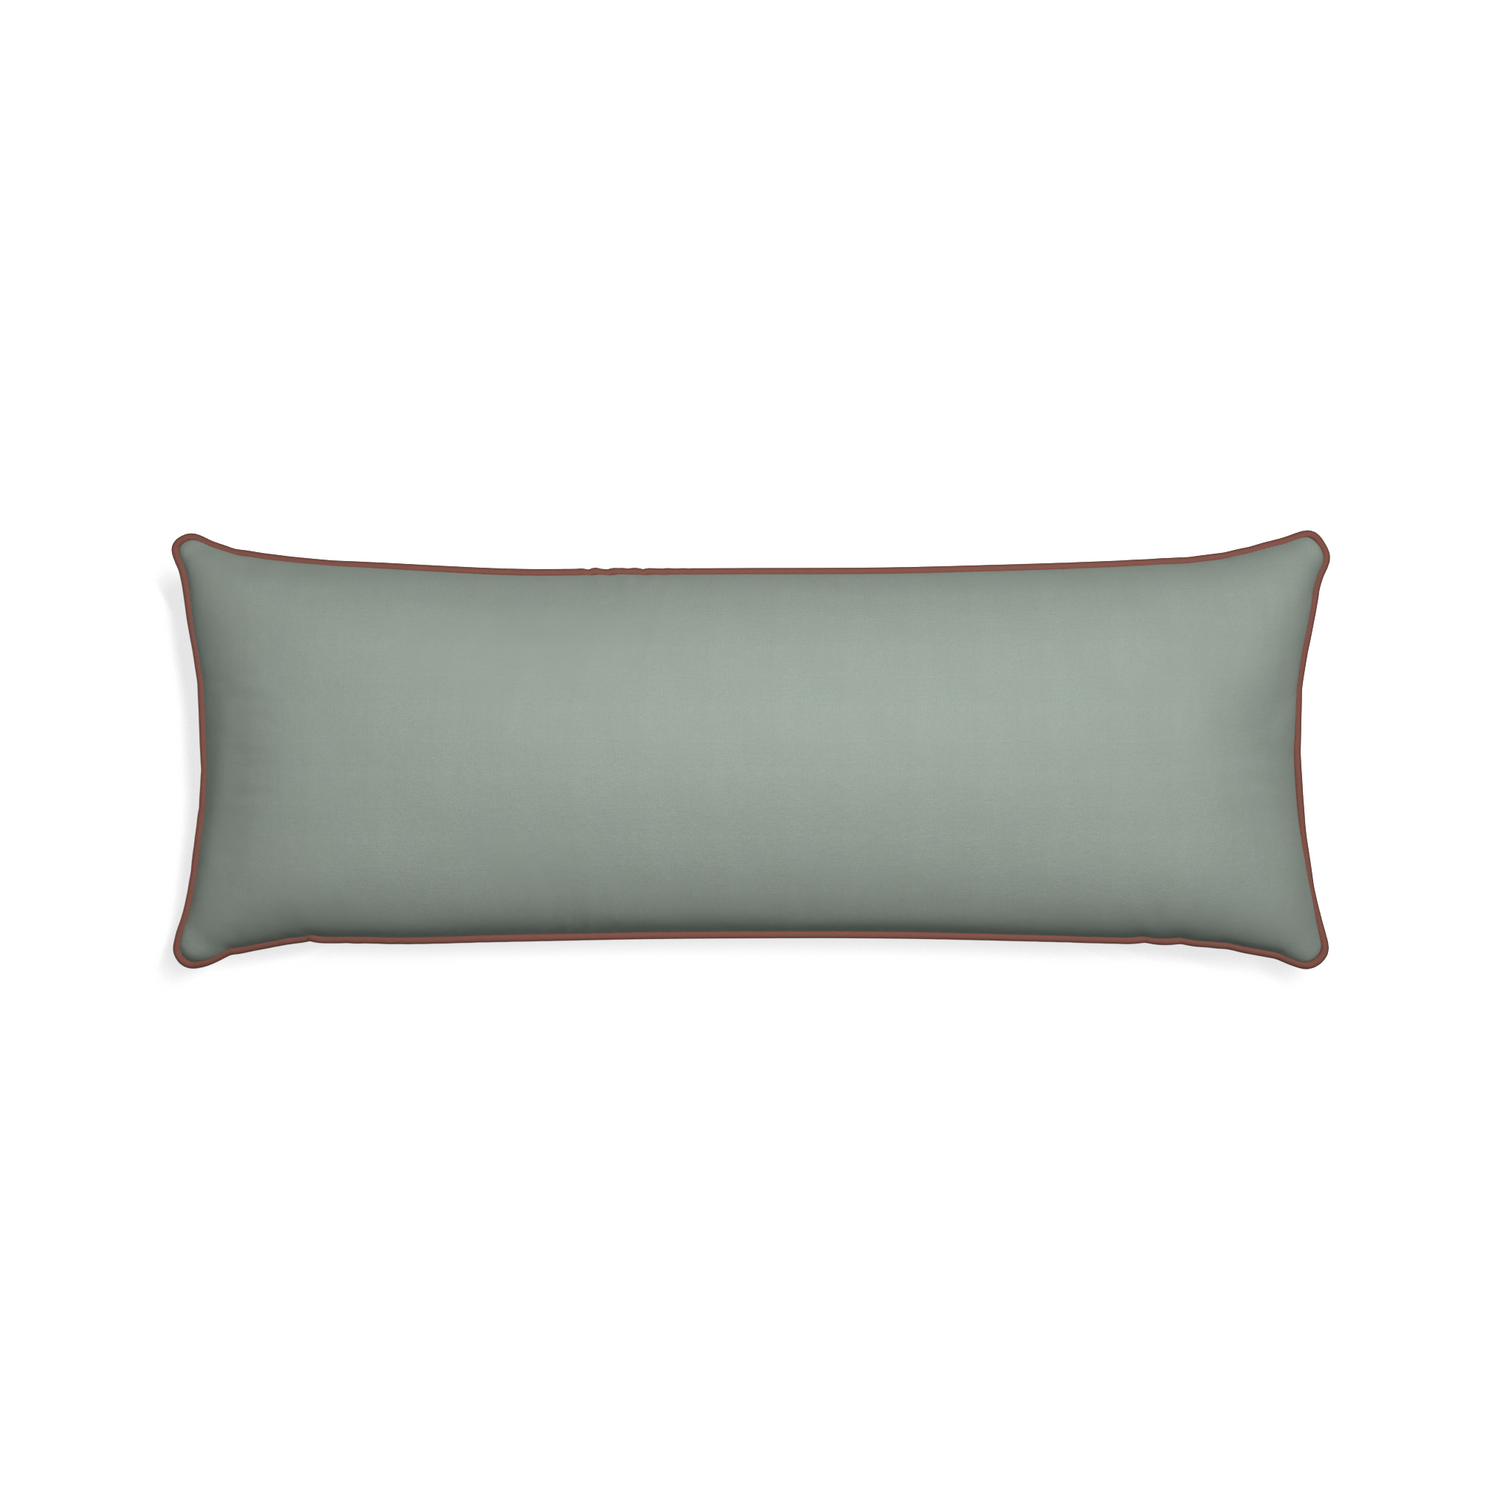 Xl-lumbar sage custom sage green cottonpillow with w piping on white background